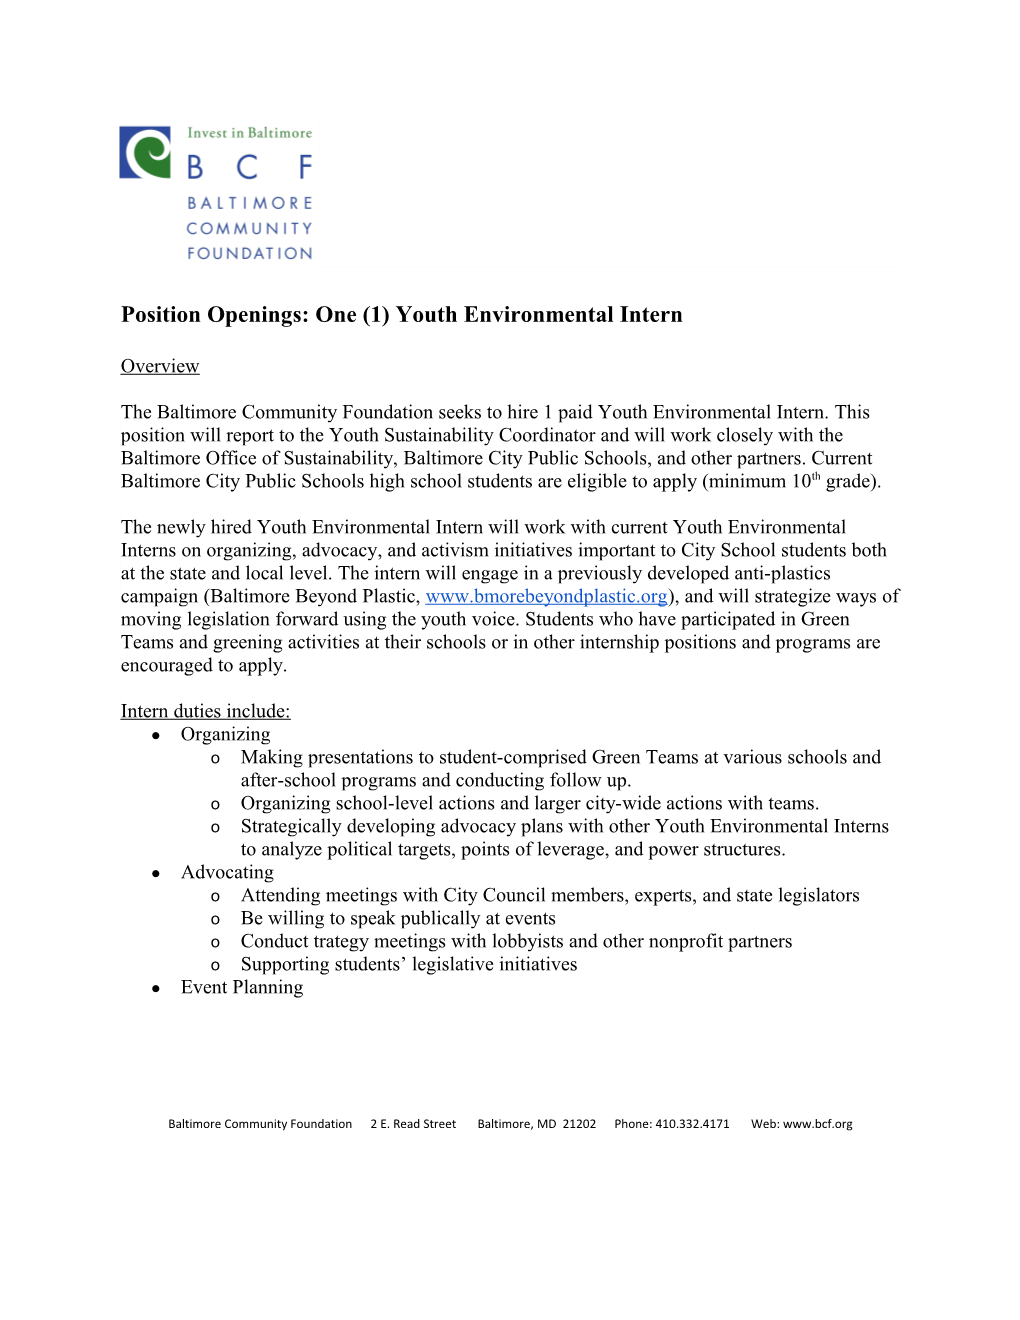 Position Openings: One (1) Youth Environmental Intern